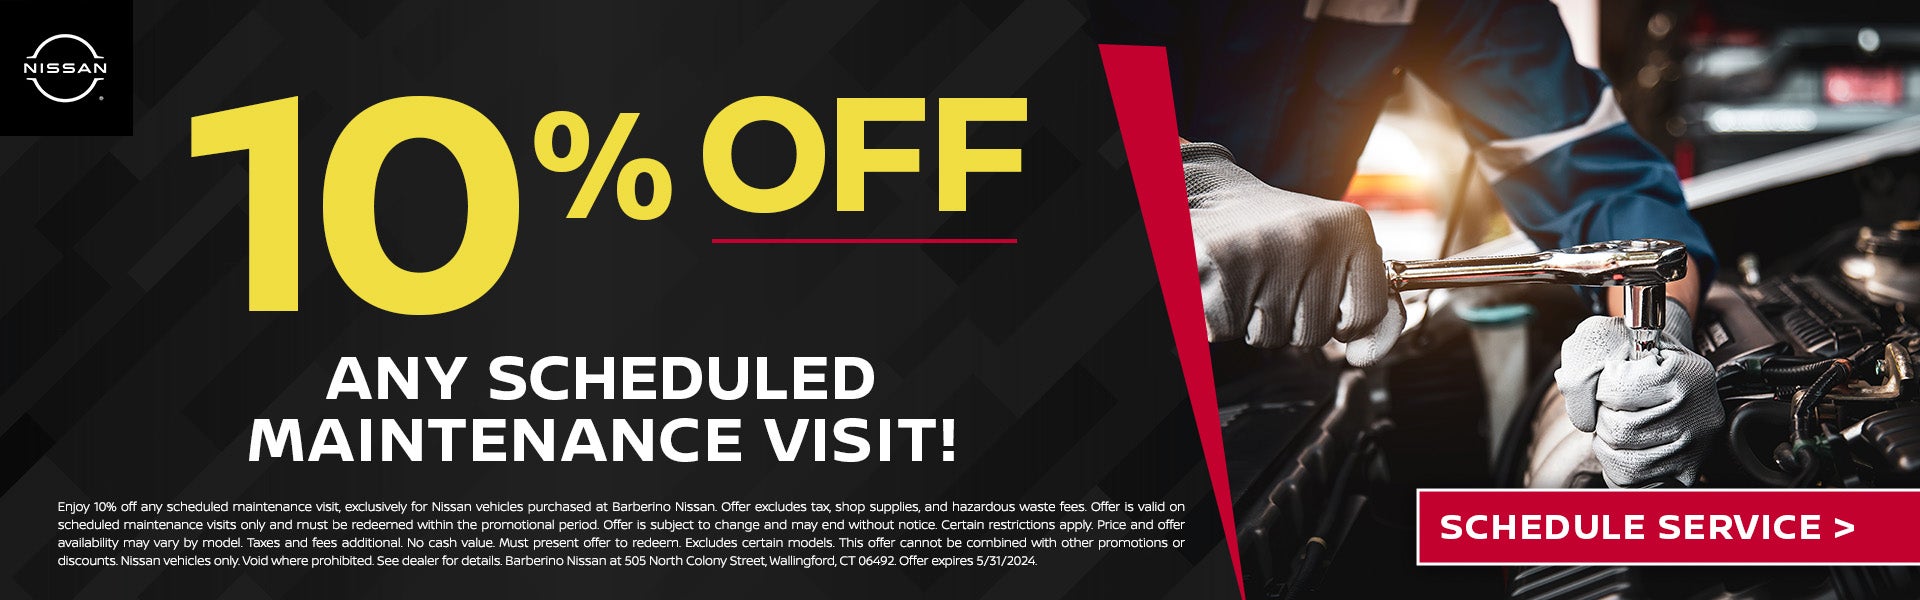 10% OFF ANY SCHEDULED MAINTENANCE VISIT!